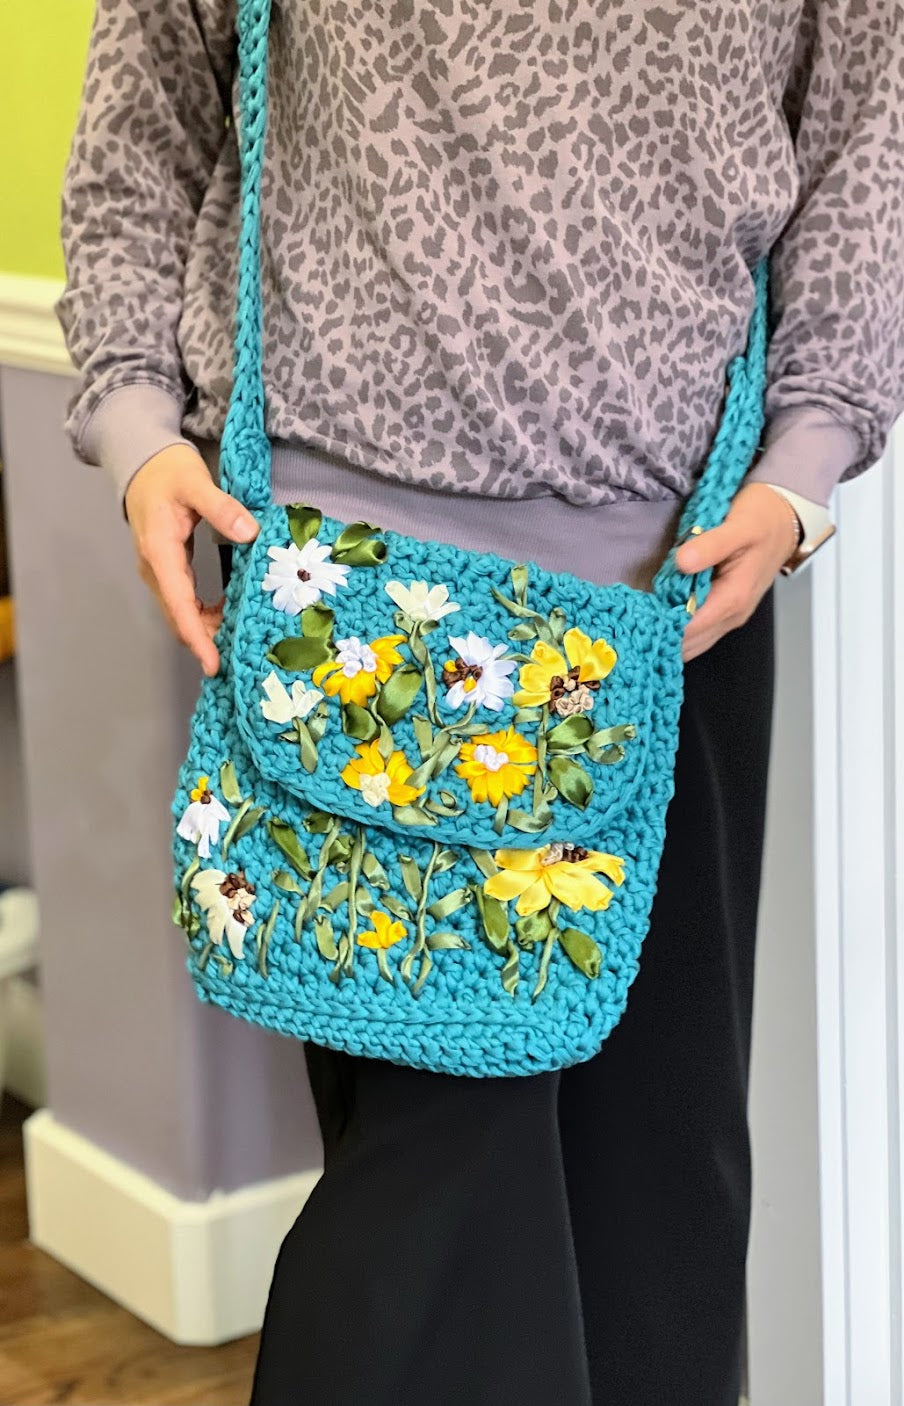 Crochet Teal Bag with Flowers - For Teens and Adults